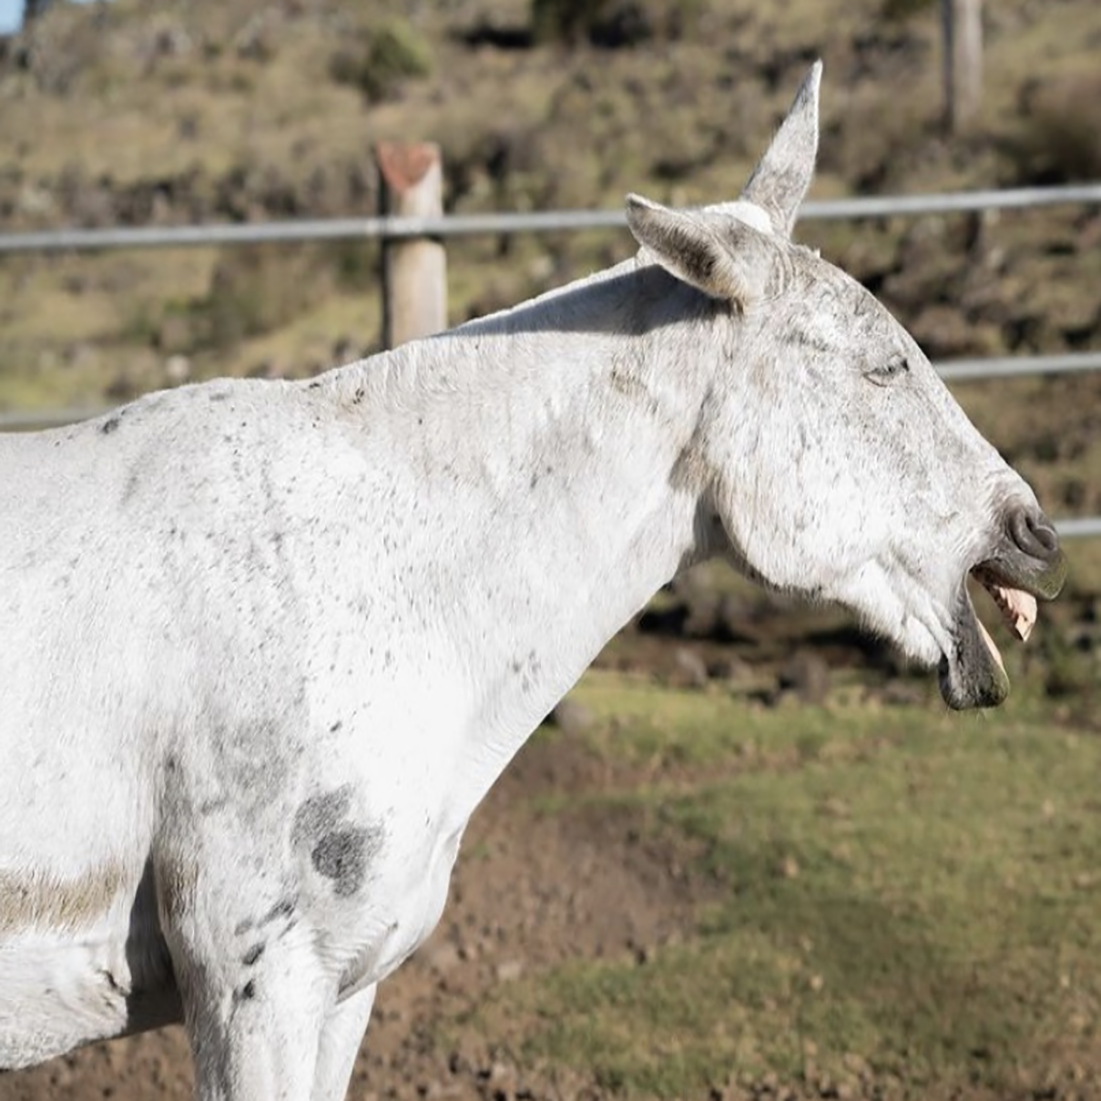 Justine, a white mule, pokes her head forward with her eyes closed and bears her teeth in a big smile.